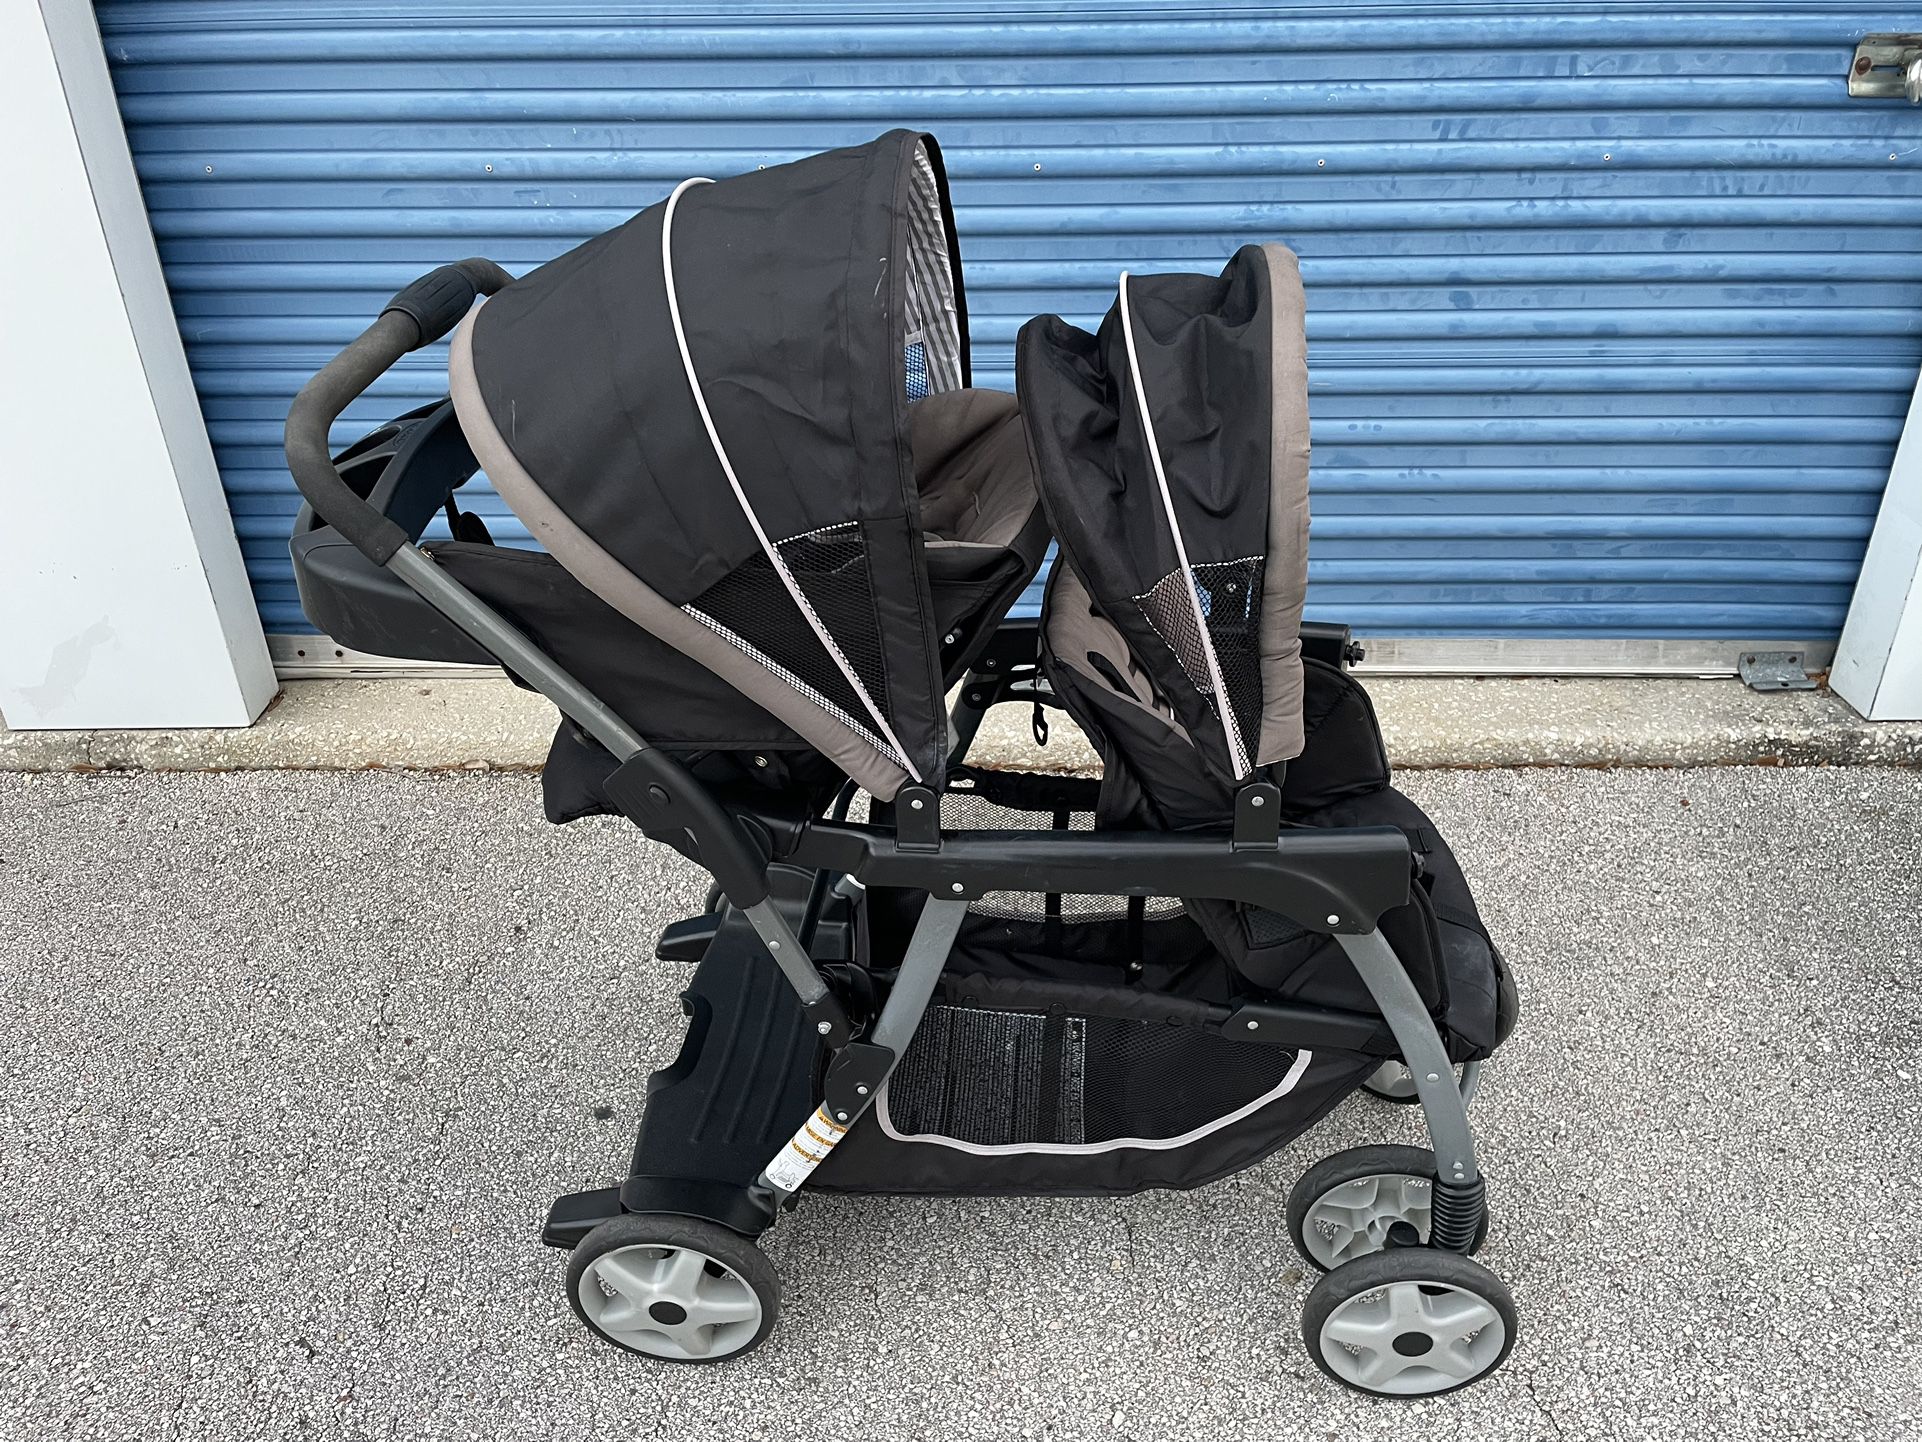 Graco Double Stroller - Used good condition 